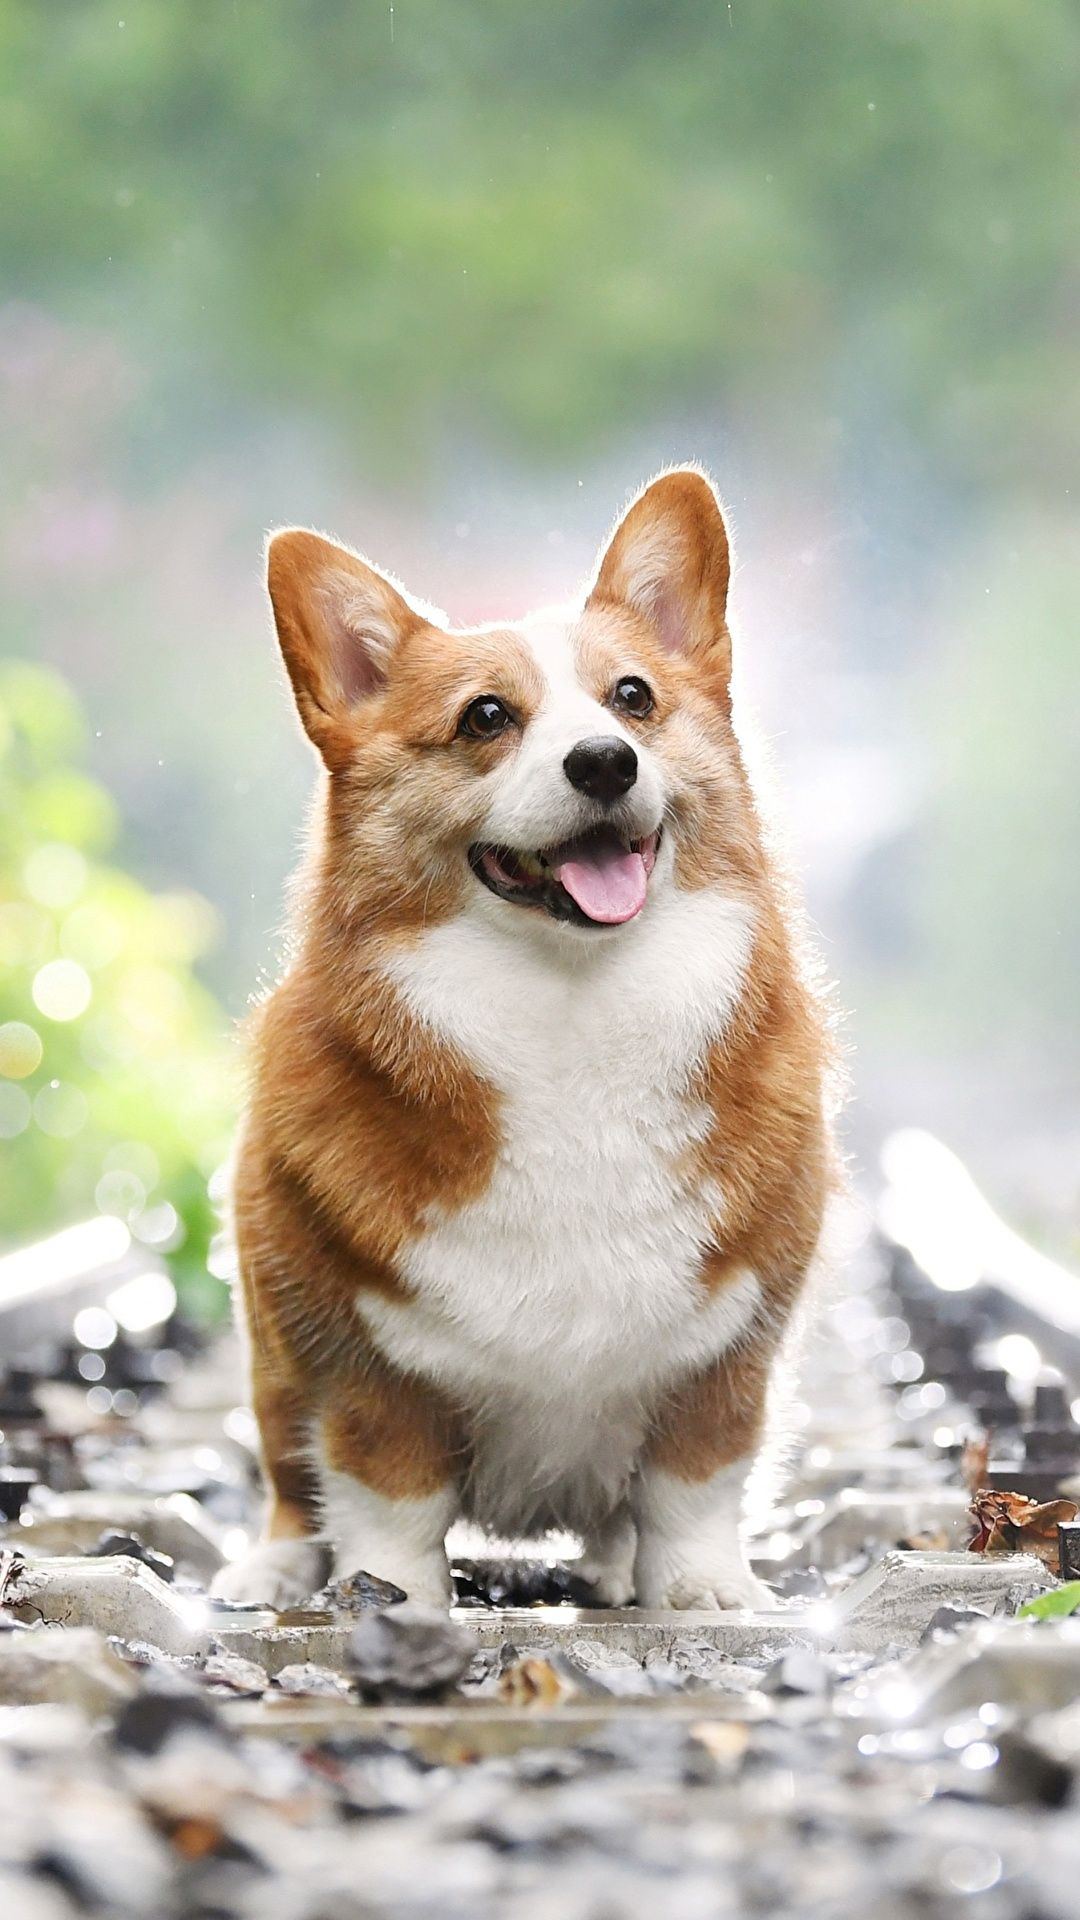 Cute Corgi Green Wallpaper Background Wallpaper Image For Free Download   Pngtree